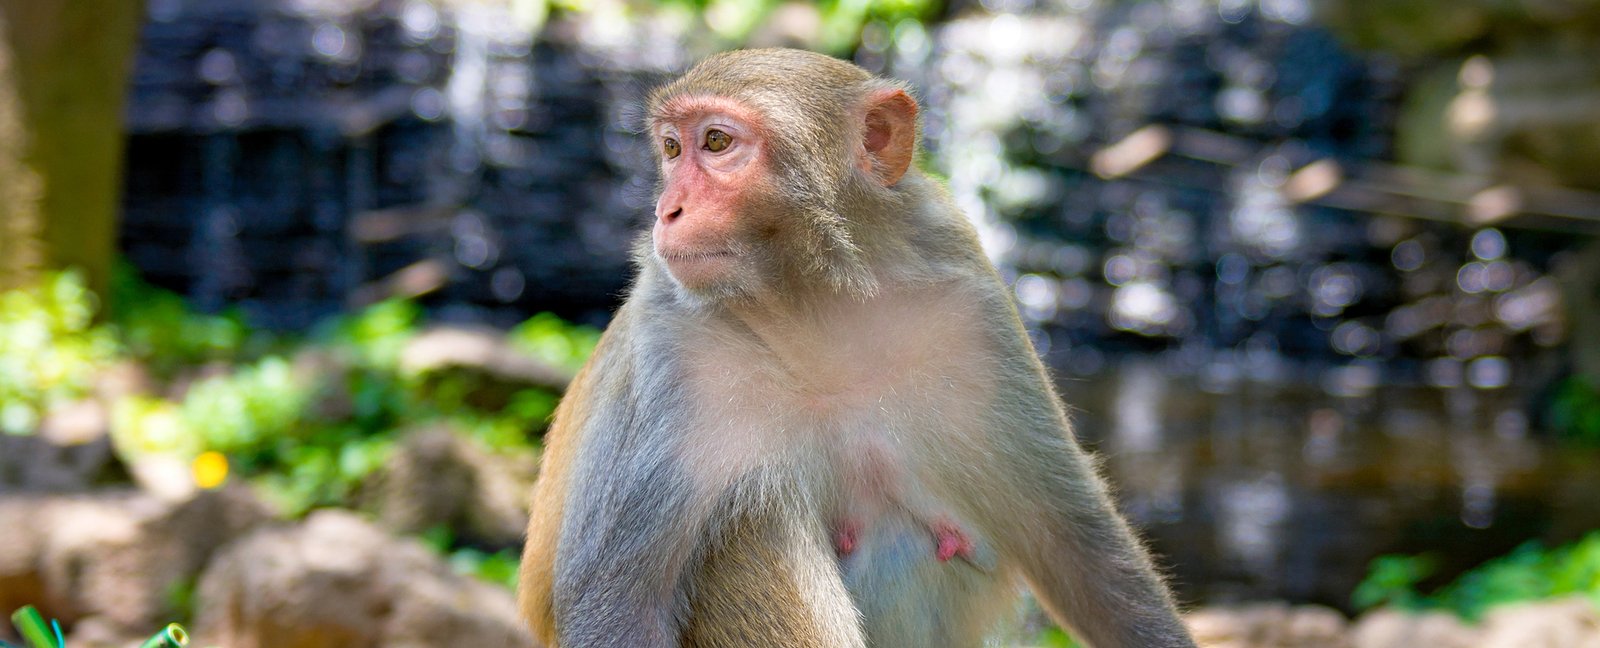 Monkey Study Reveals 91 Changes in Virtually Every Body Organ During Pregnancy : ScienceAlert